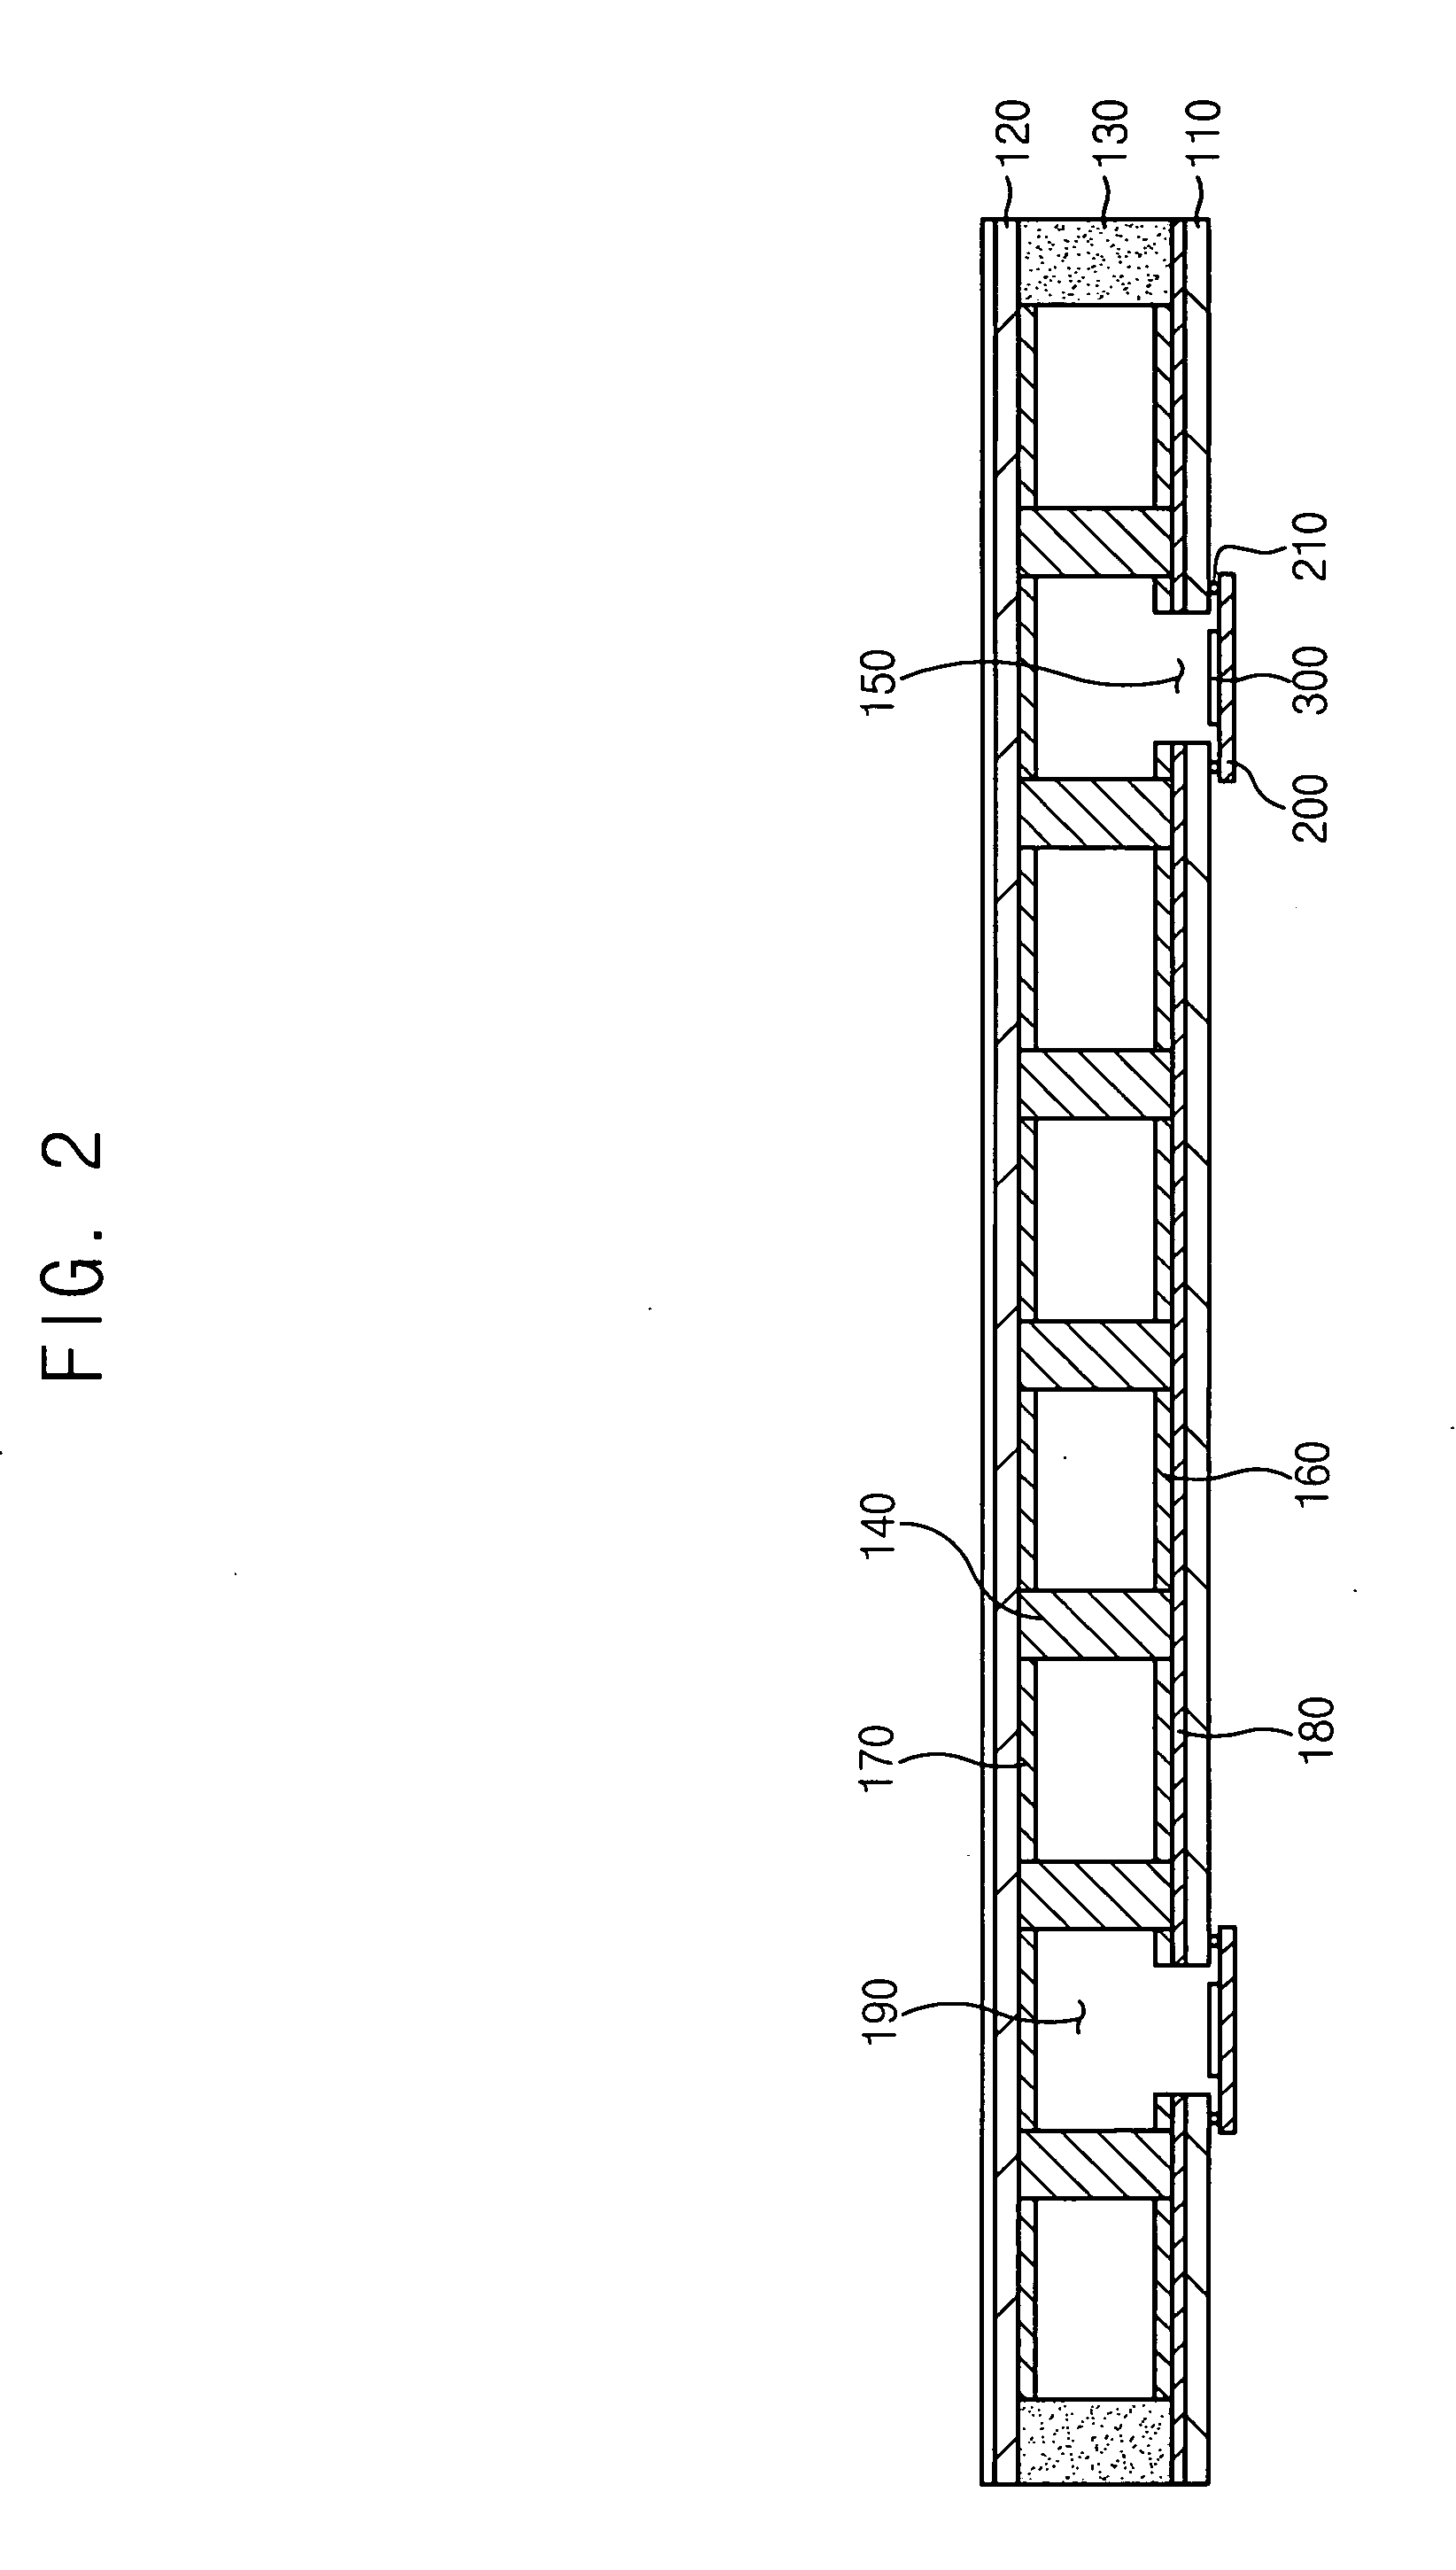 Planar light source device, method for manufacturing the same, and display device having the same